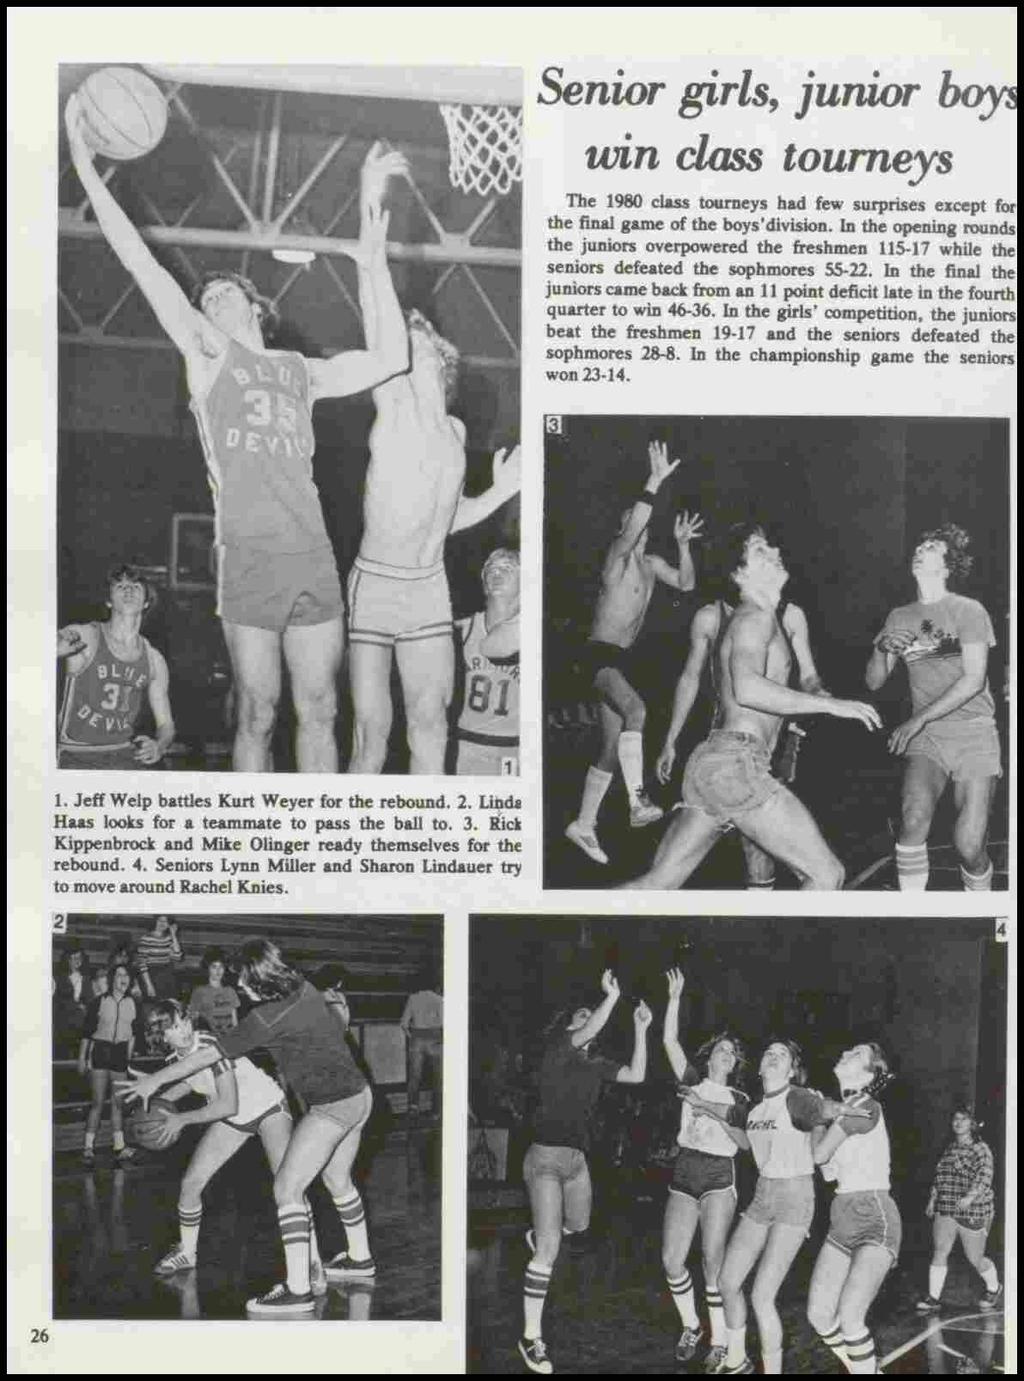 Senior girls, junior win class tourneys The 1980 class tourneys had few surprises except the final game of the boys'division.